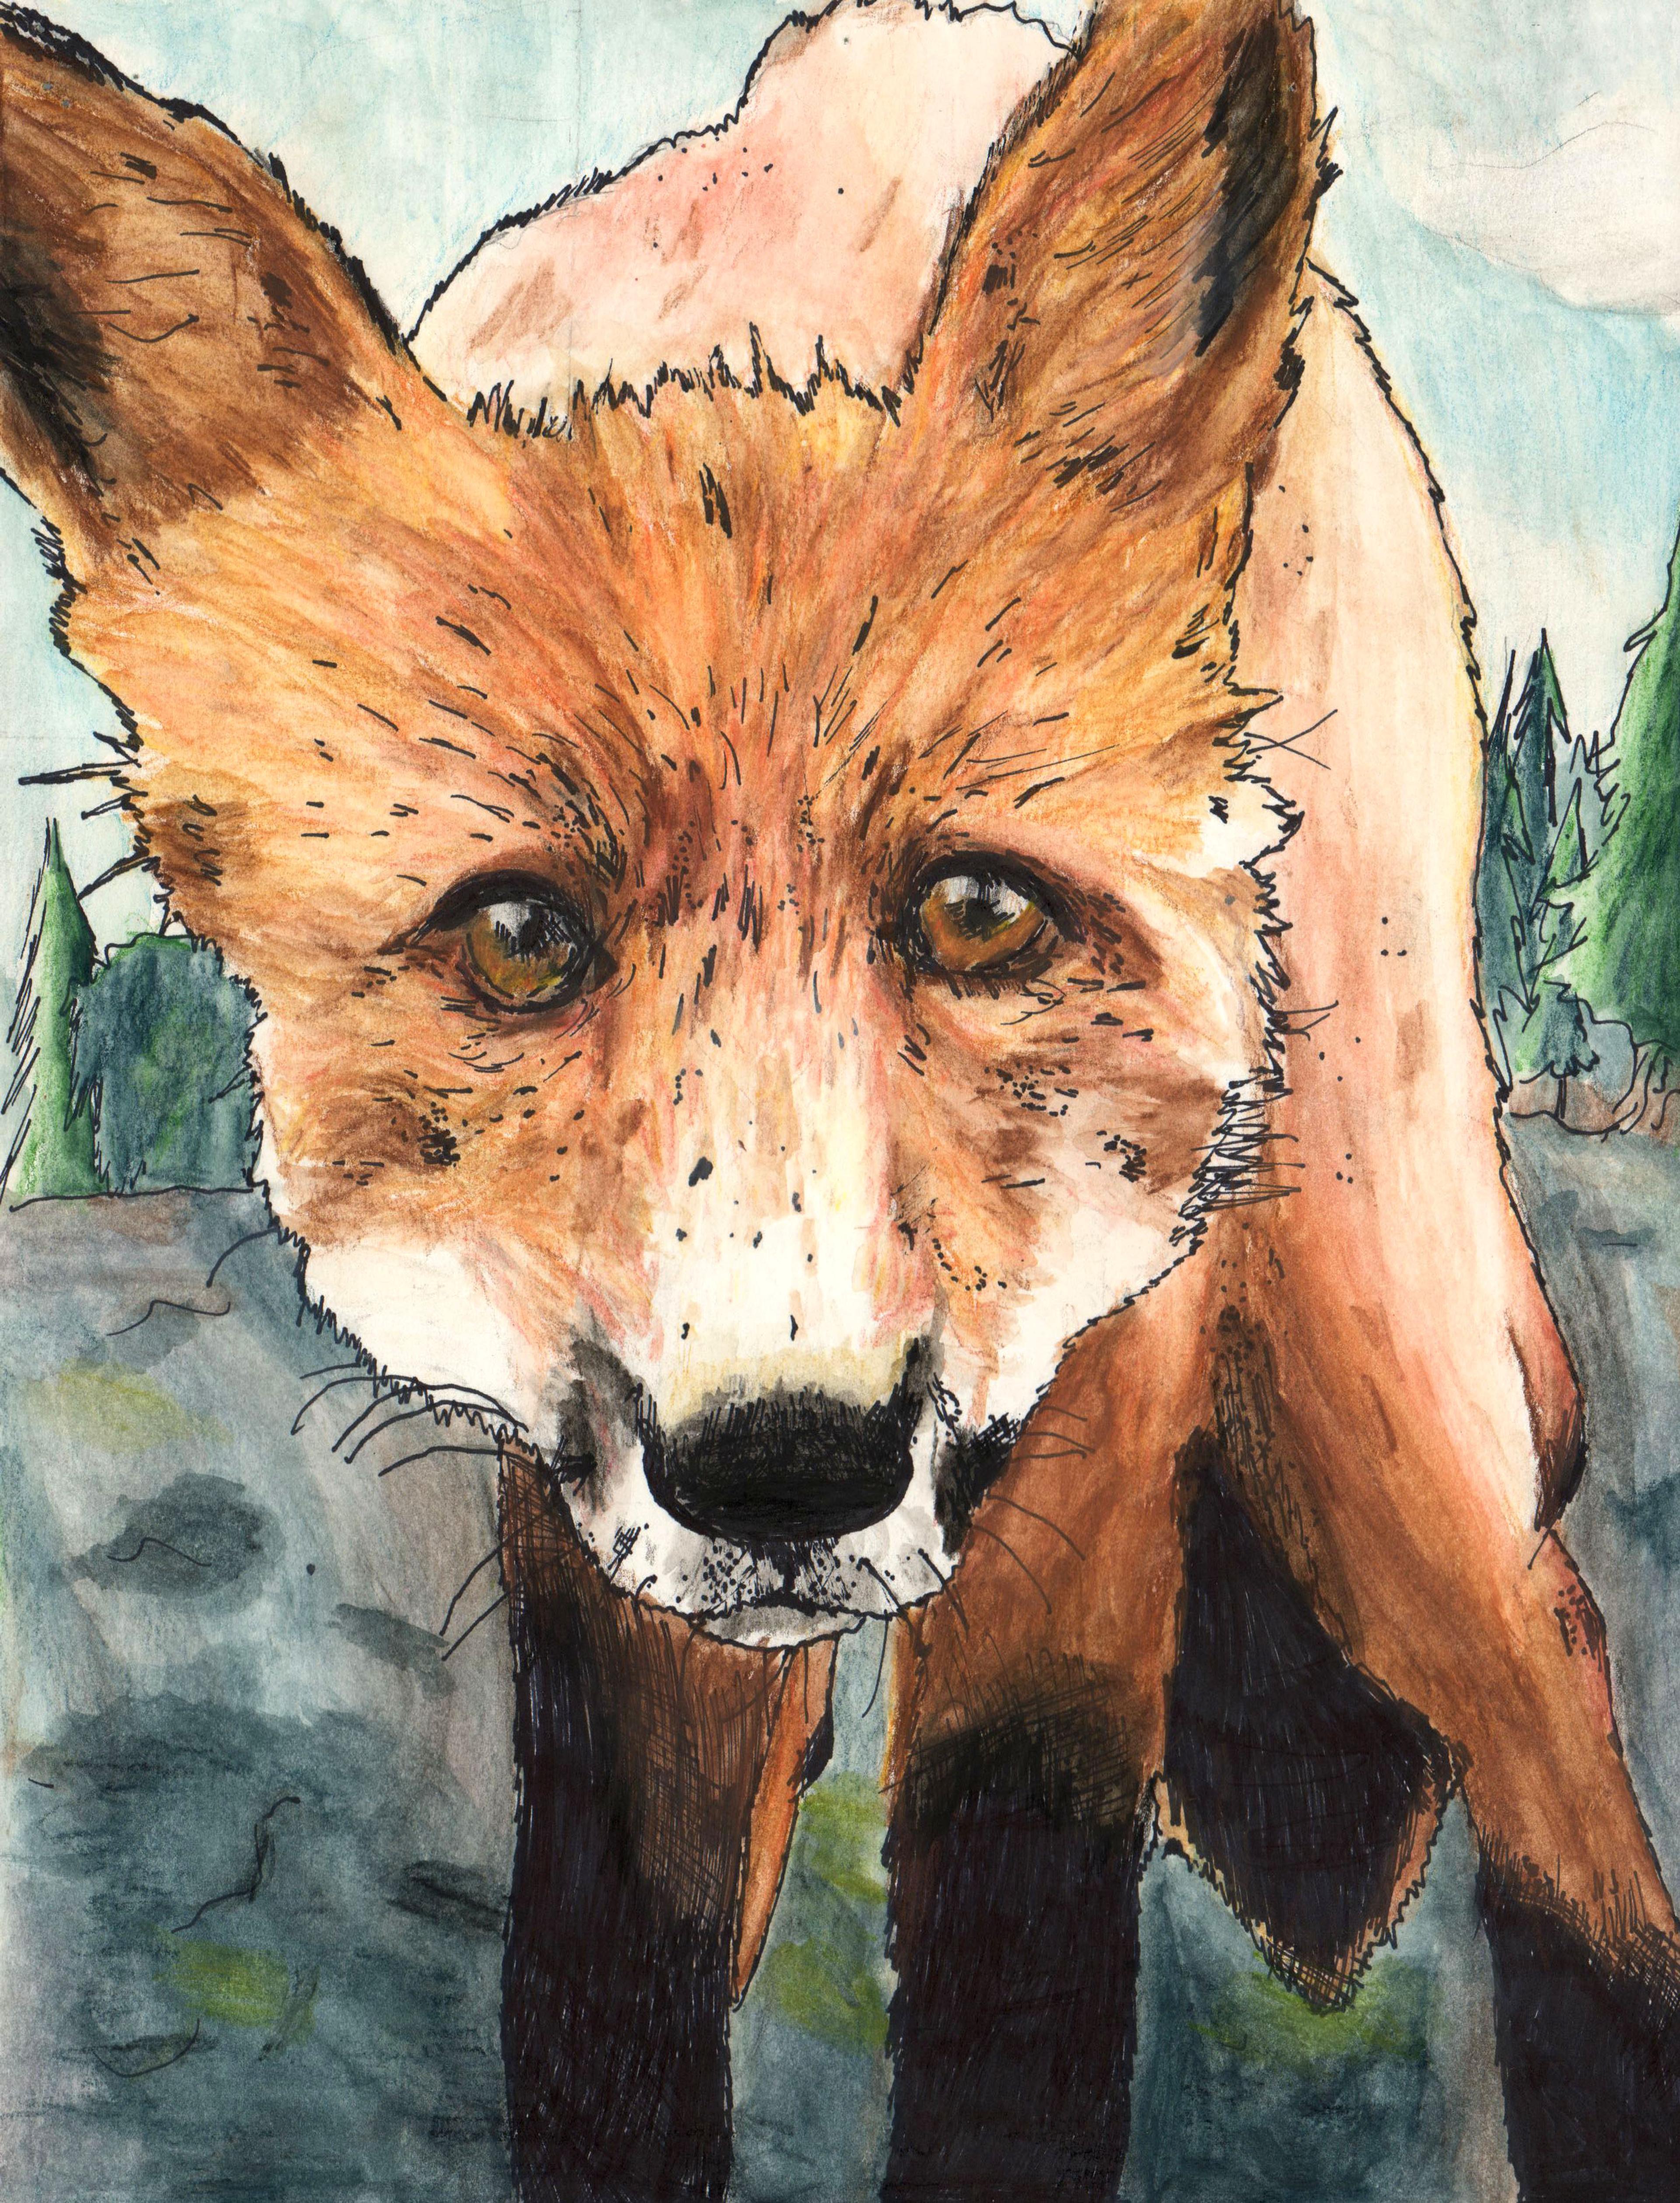 Drawing of a close-up view of a pale red fox standing and stares directly at the viewer with intensity. Created with watercolor pencil and black ink, the fox is outlined in fine black ink strokes. It stands on gray land, with green pine trees and a light blue sky in the distant background.